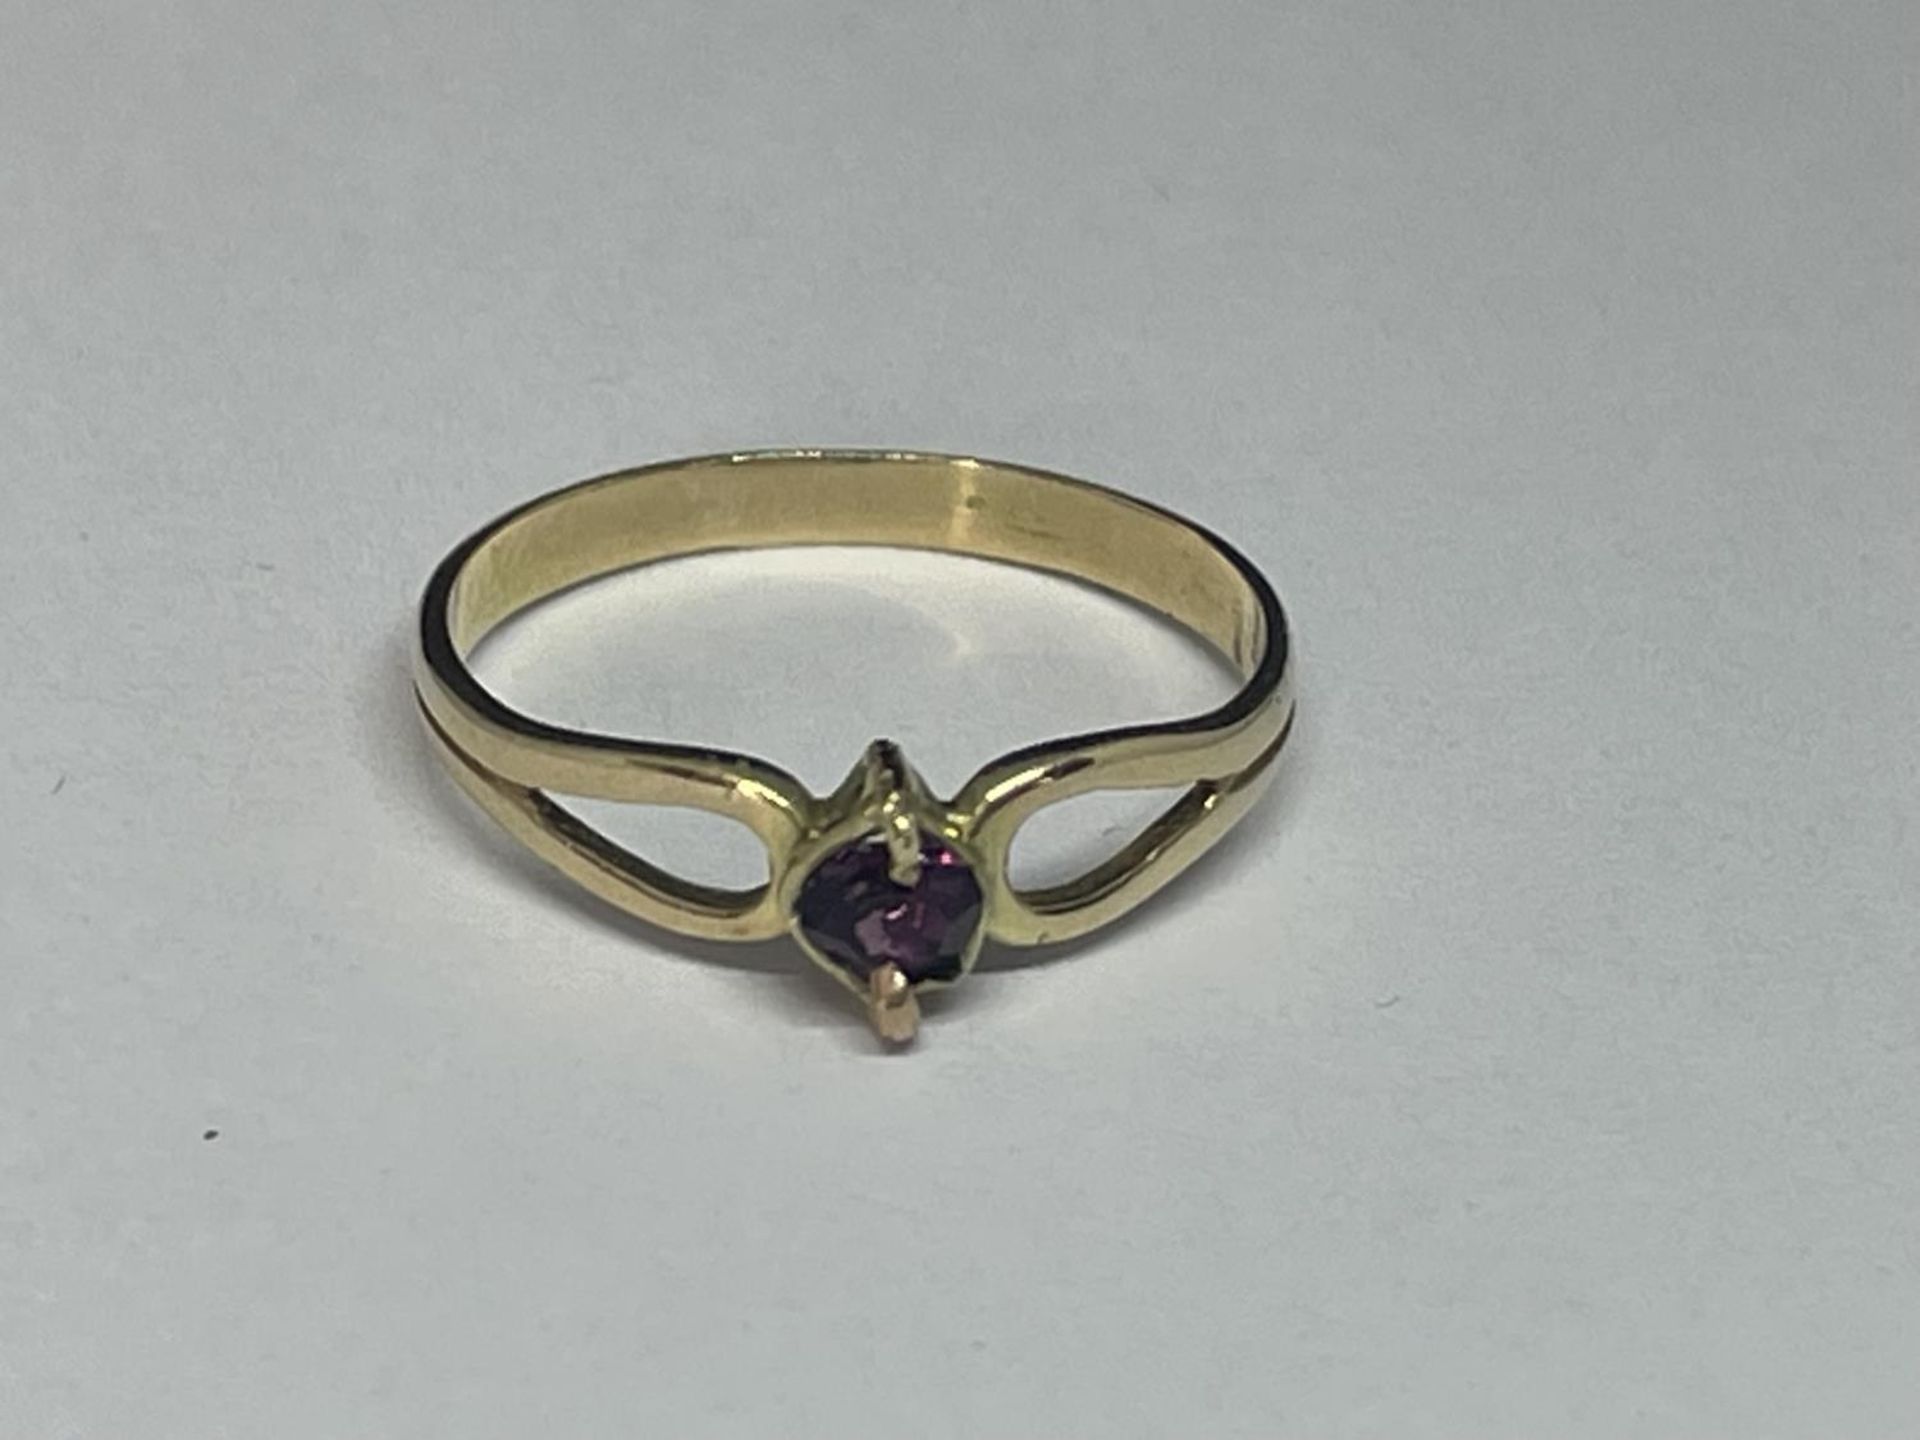 A 14 CARAT GOLD RING WITH A SINGLE PURPLE STONE SIZE M/N IN A PRESENTATION BOX